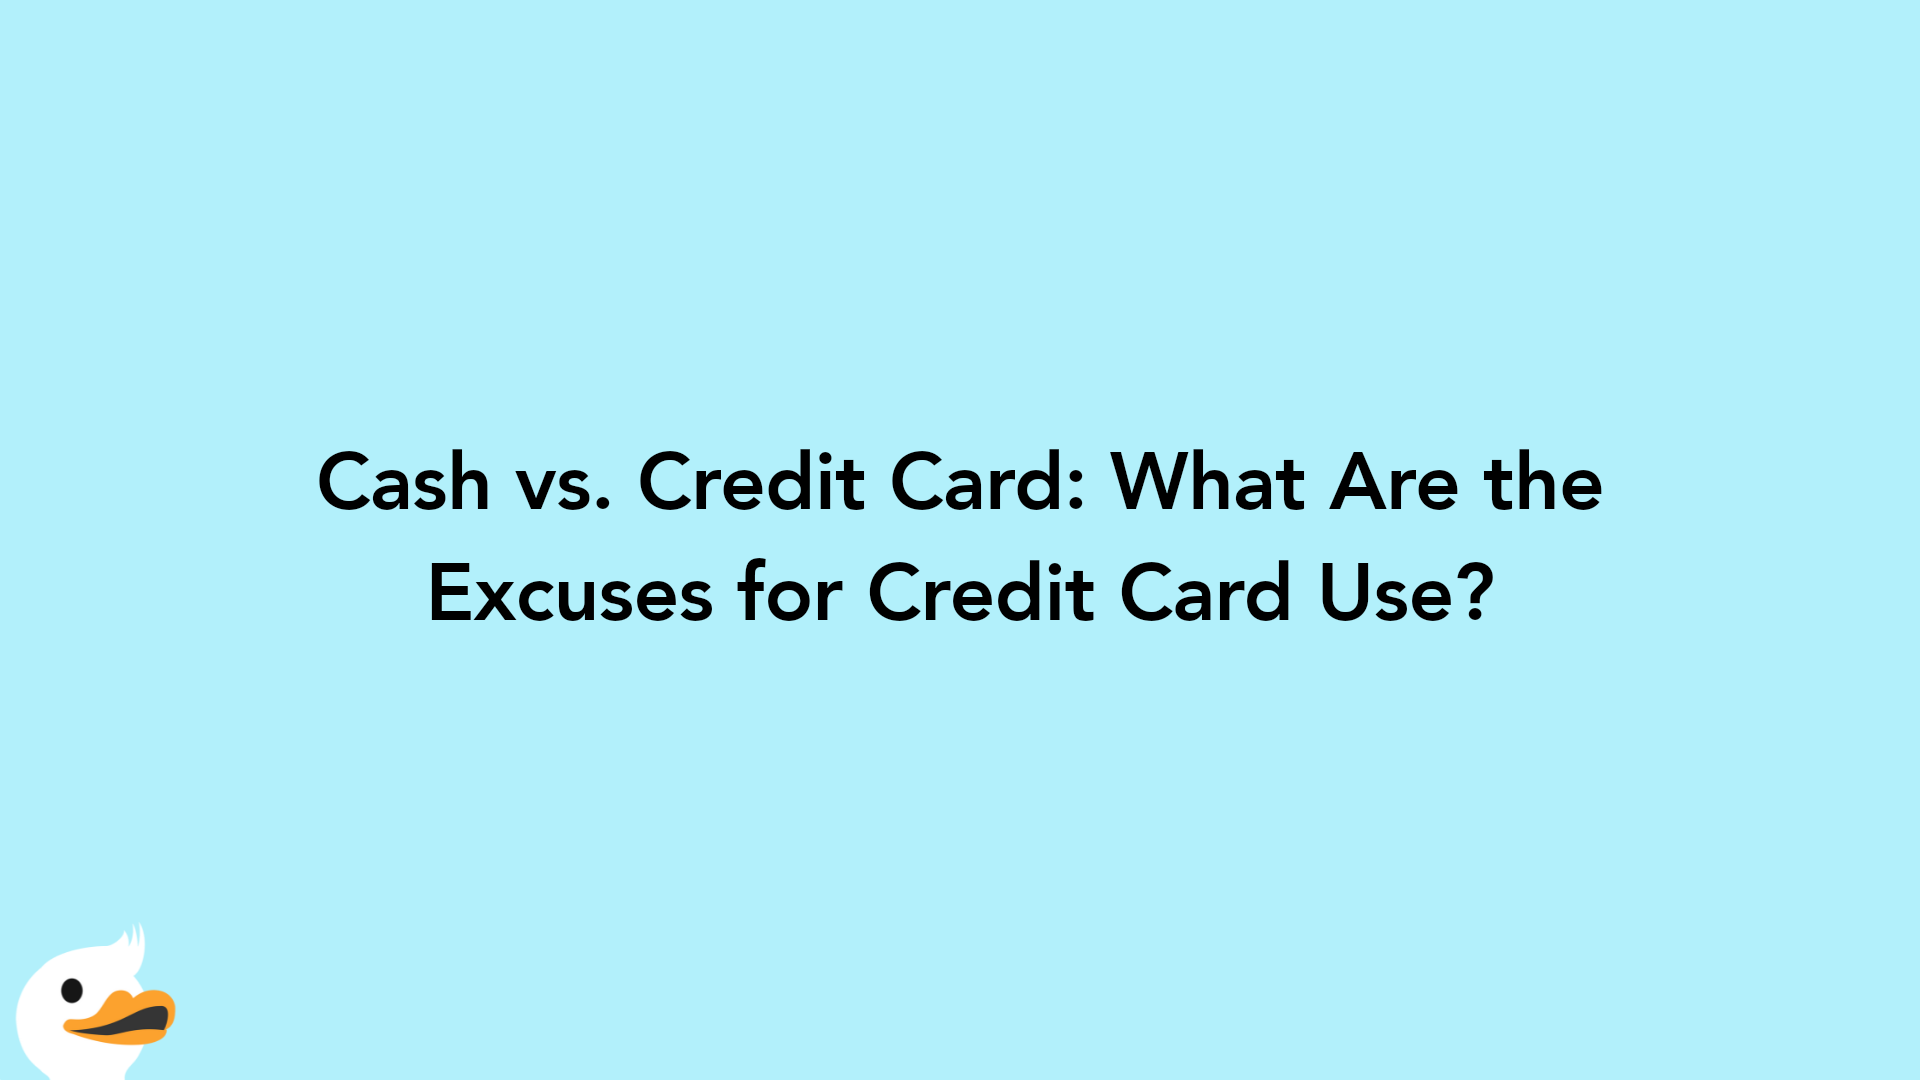 Cash vs. Credit Card: What Are the Excuses for Credit Card Use?